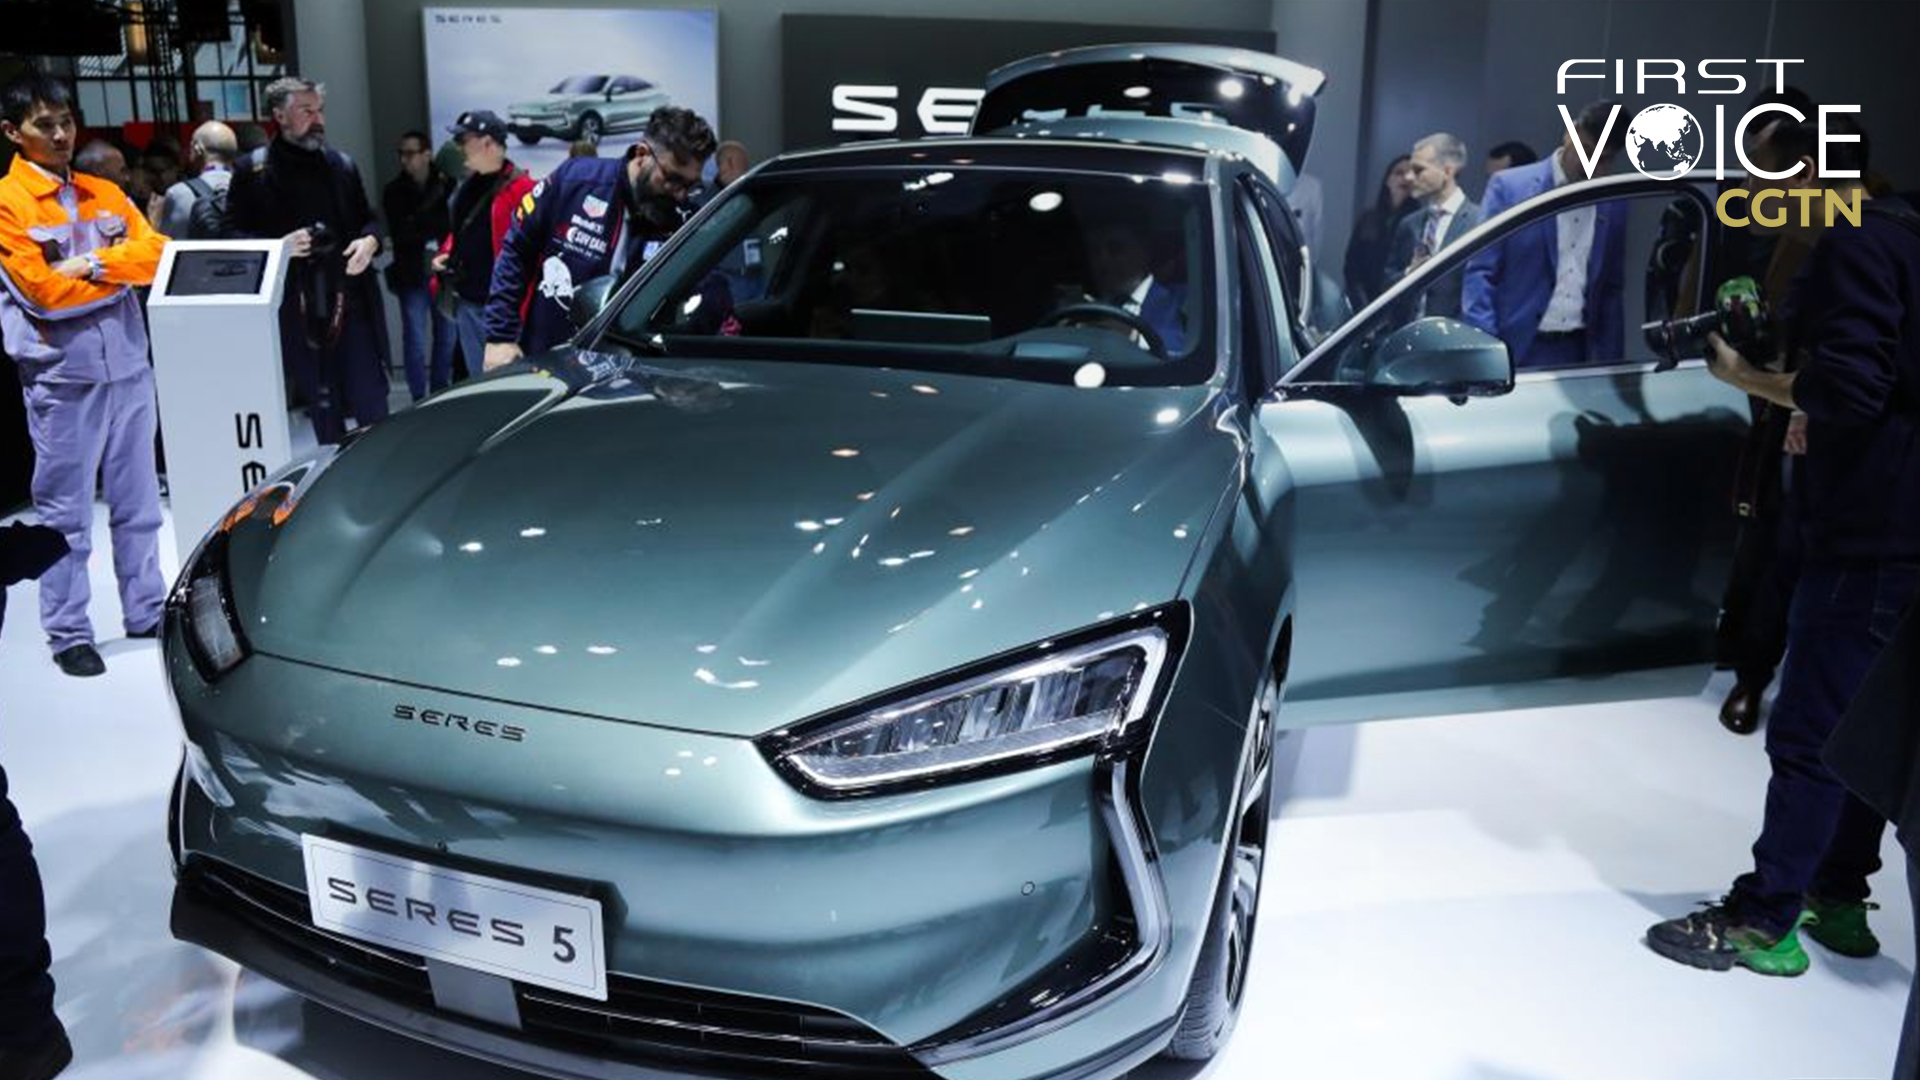 People experience a Seres 5 electric car during a media preview of the 100th Brussels Motor Show in Brussels, Belgium, January 13, 2023. /Xinhua